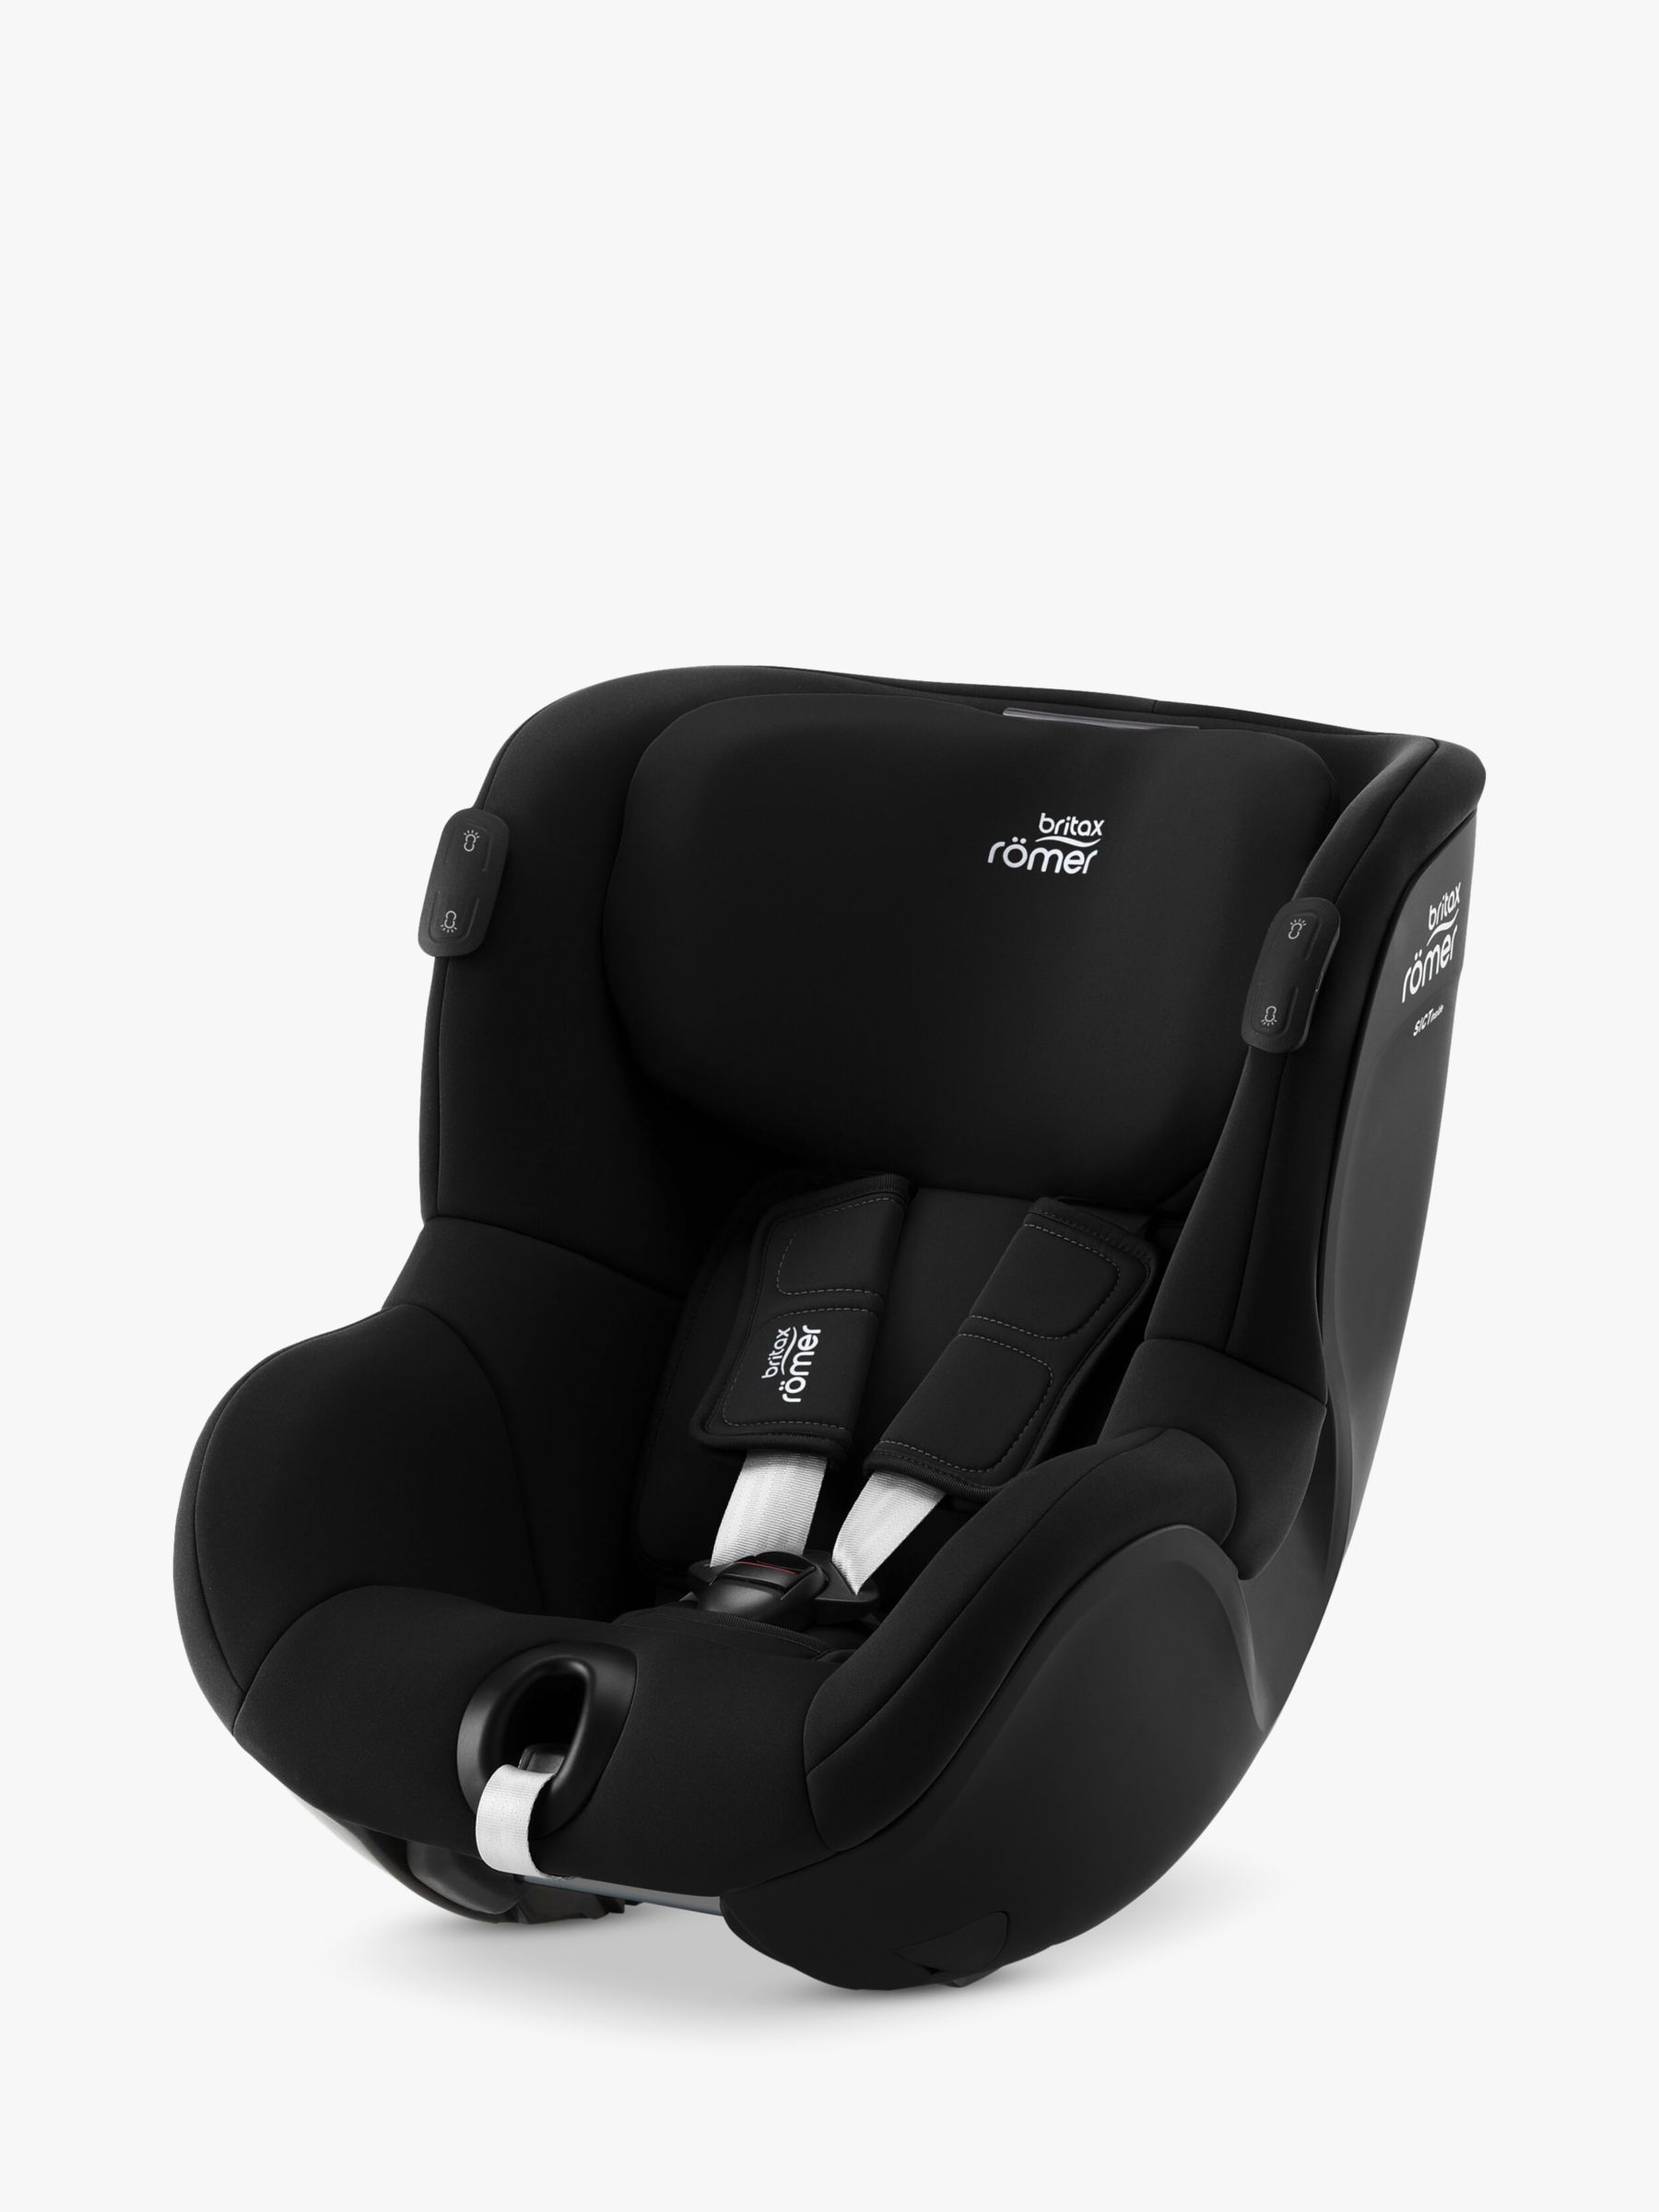 Tried and tested: Britax Römer DUALFIX i-SIZE car seat review